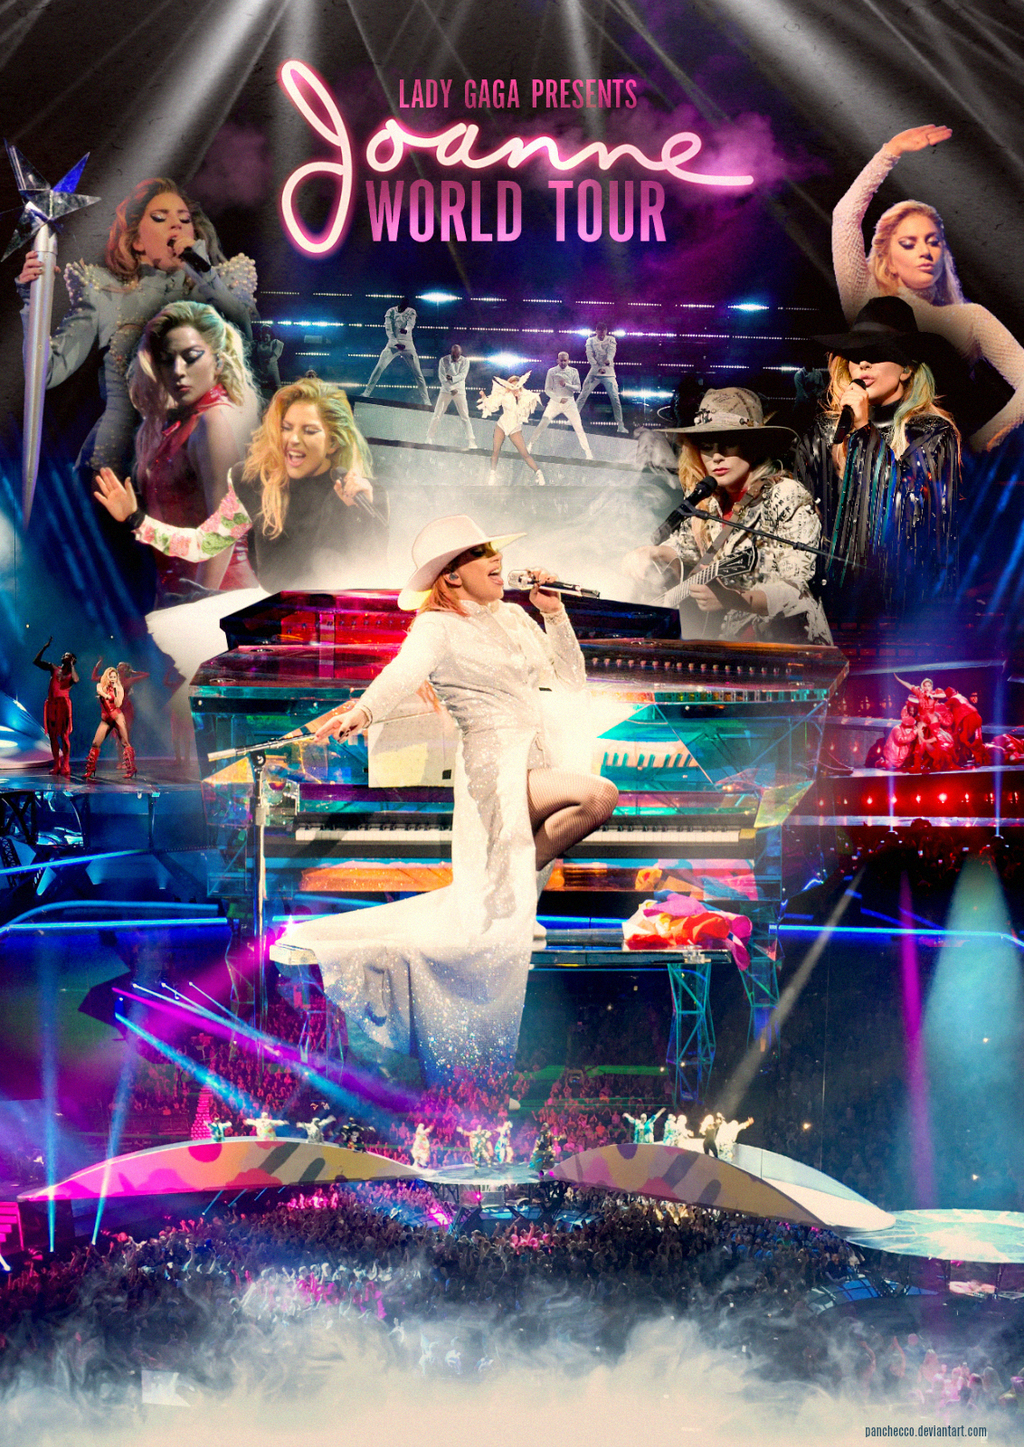 Lady Gaga Presents The Joanne World Tour Poster By Panchecco On Deviantart